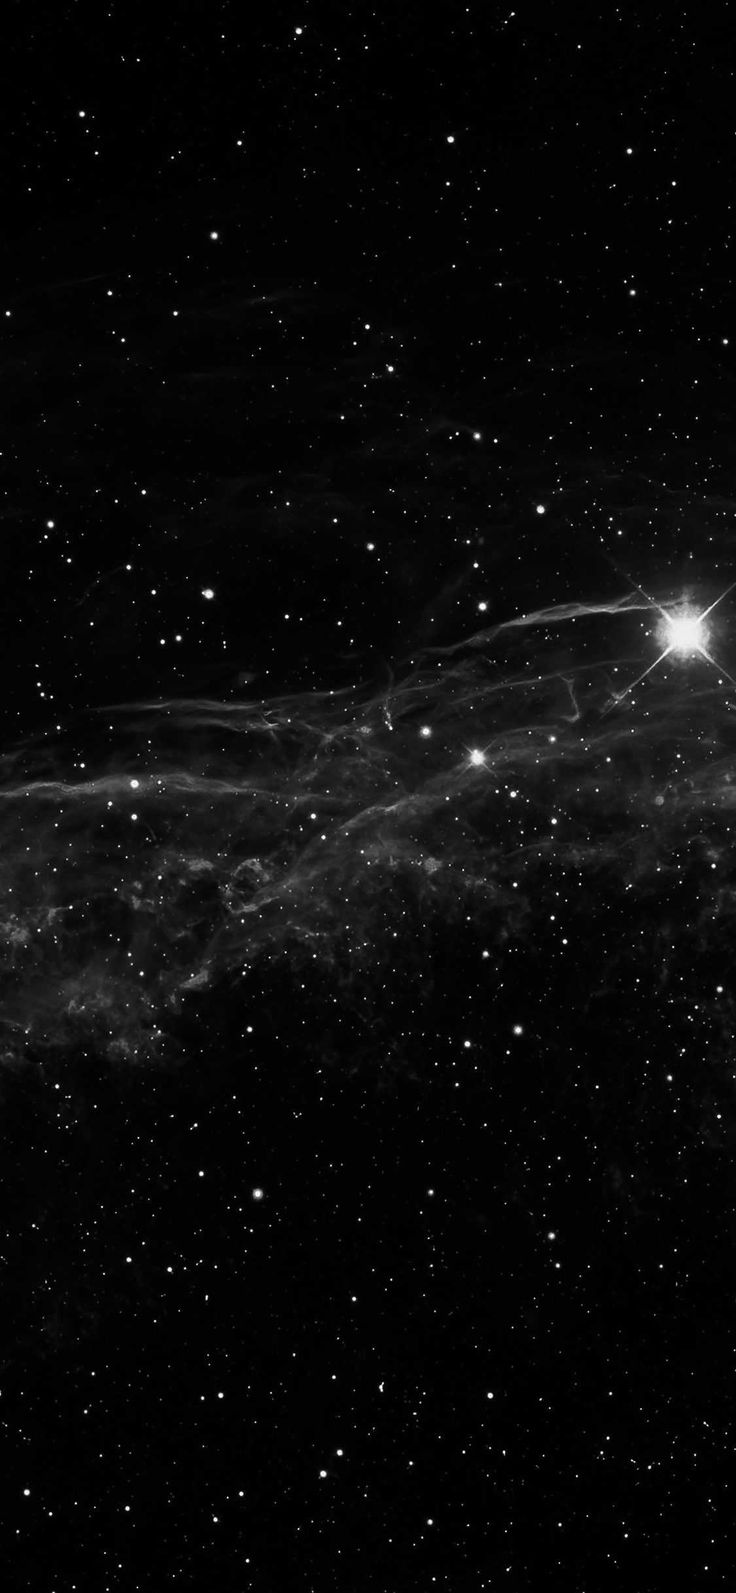 A black and white image of the milky way - Stars